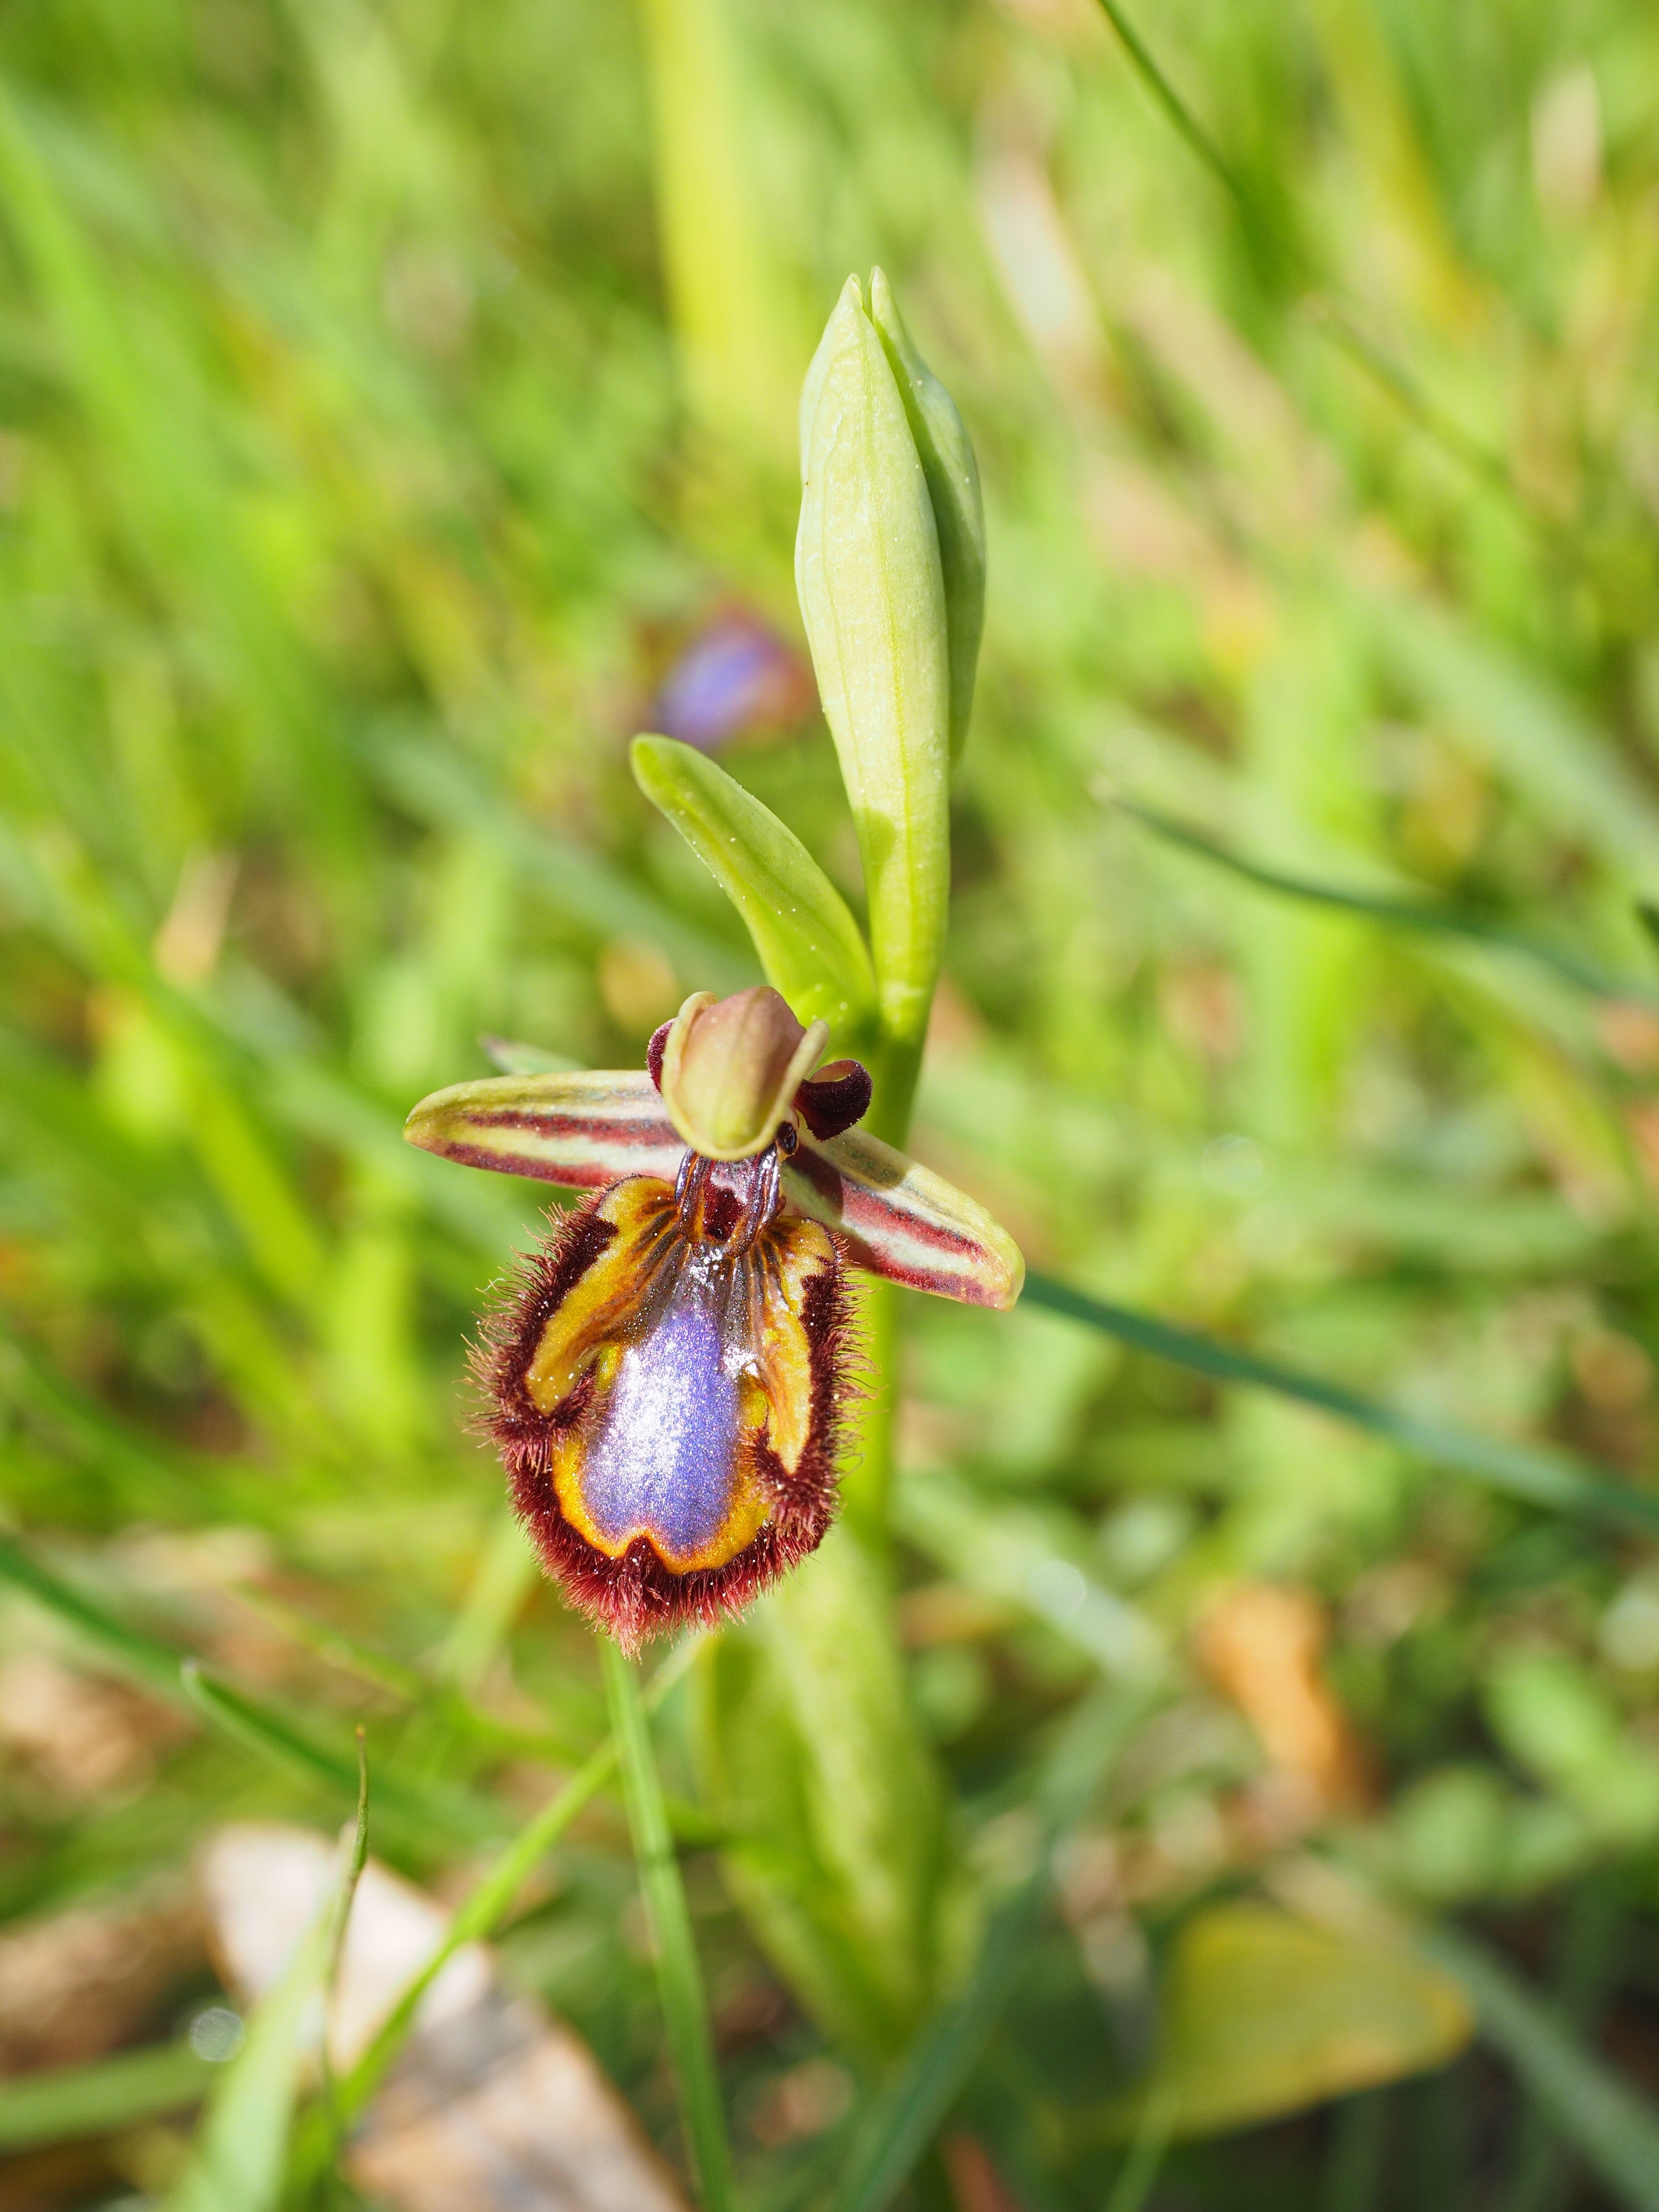 Spiegelragwurz, Ophrys Speculum, nature, green color